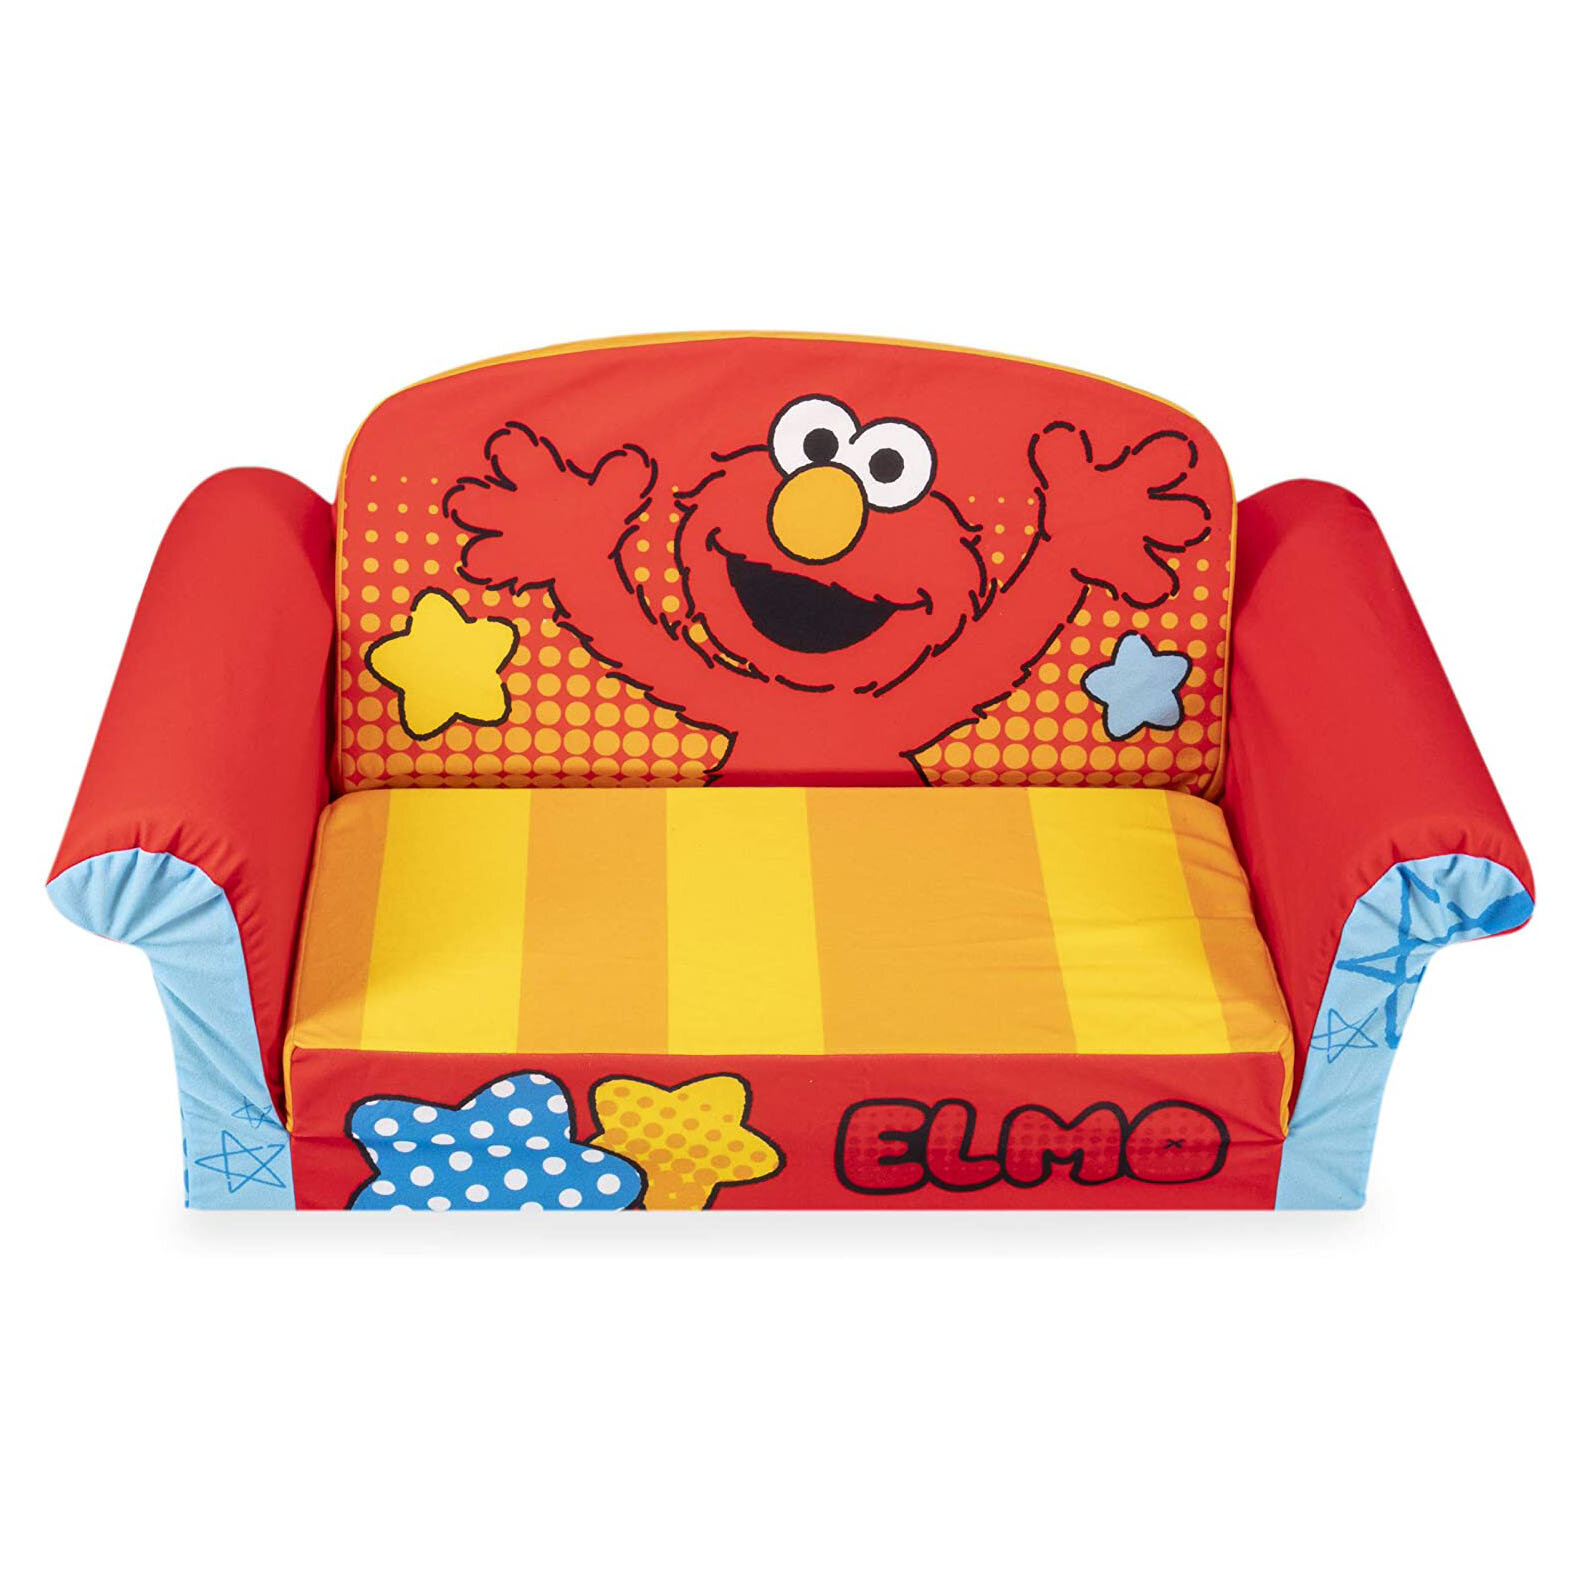 marshmallow chair for toddlers